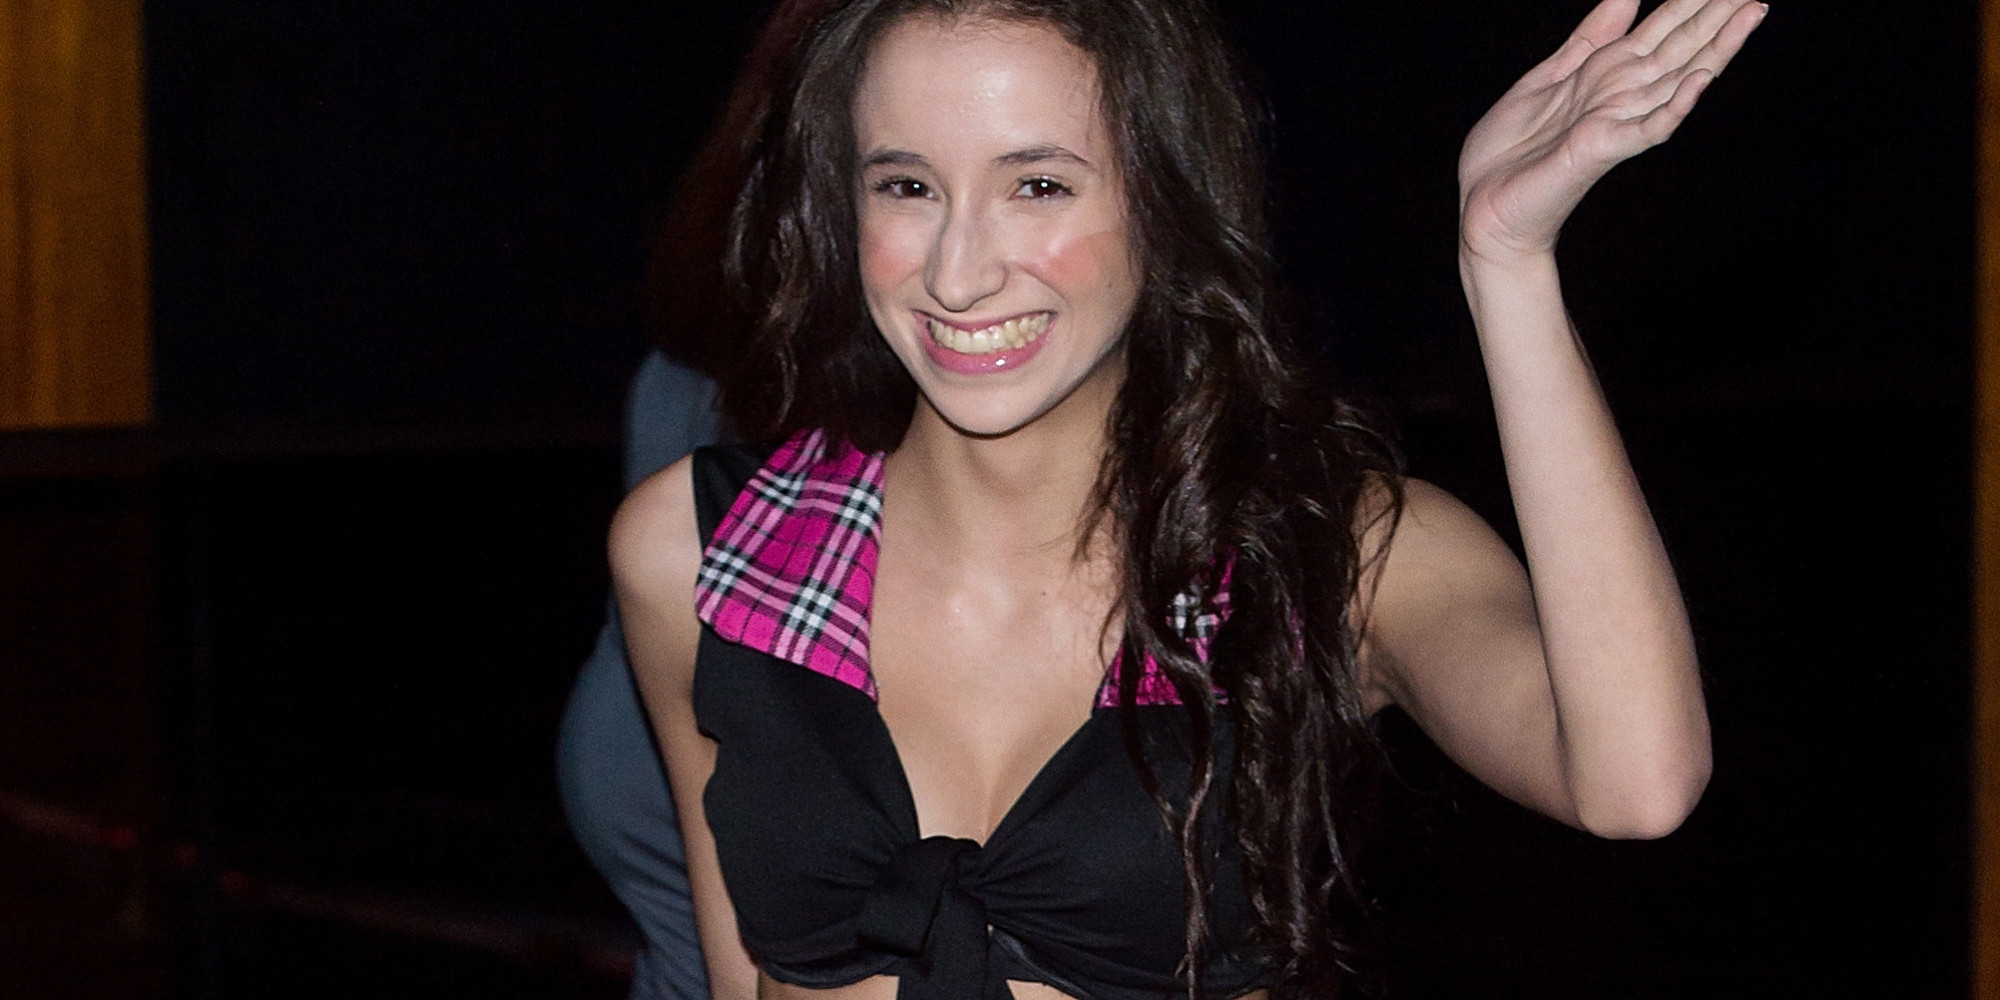 Belle Knox Biography And How She Put Herself Through Law School